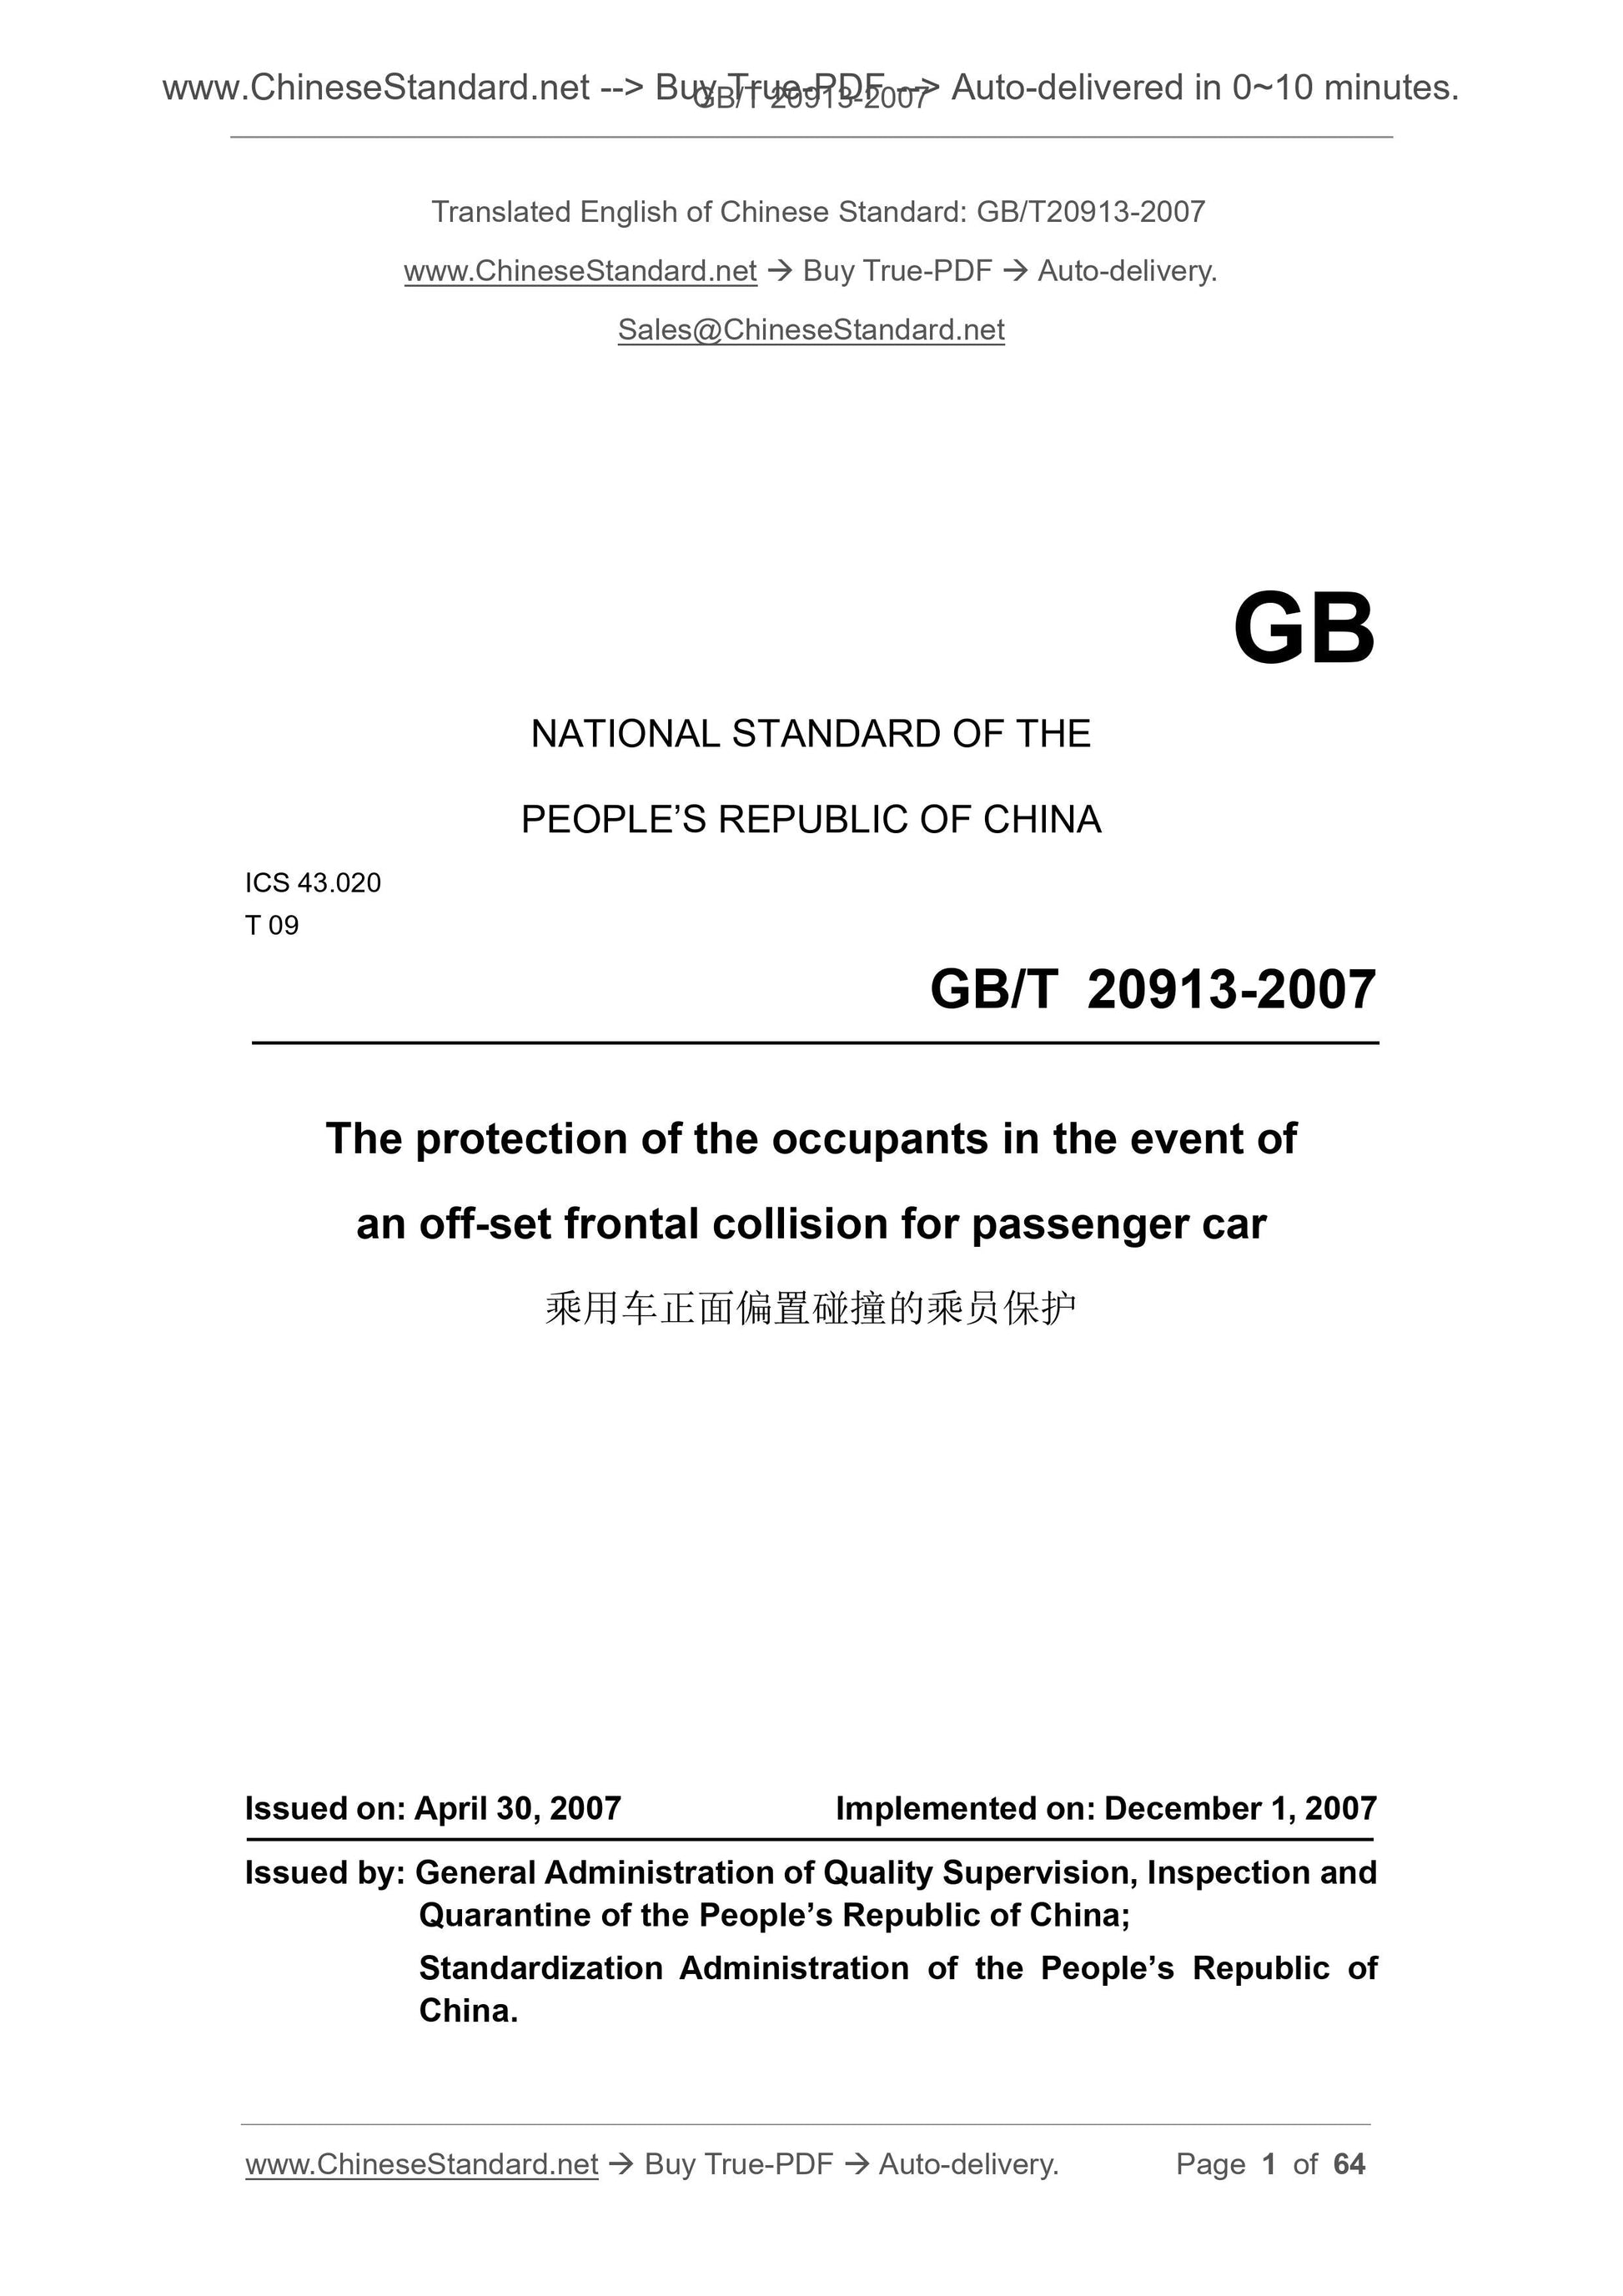 GB/T 20913-2007 Page 1